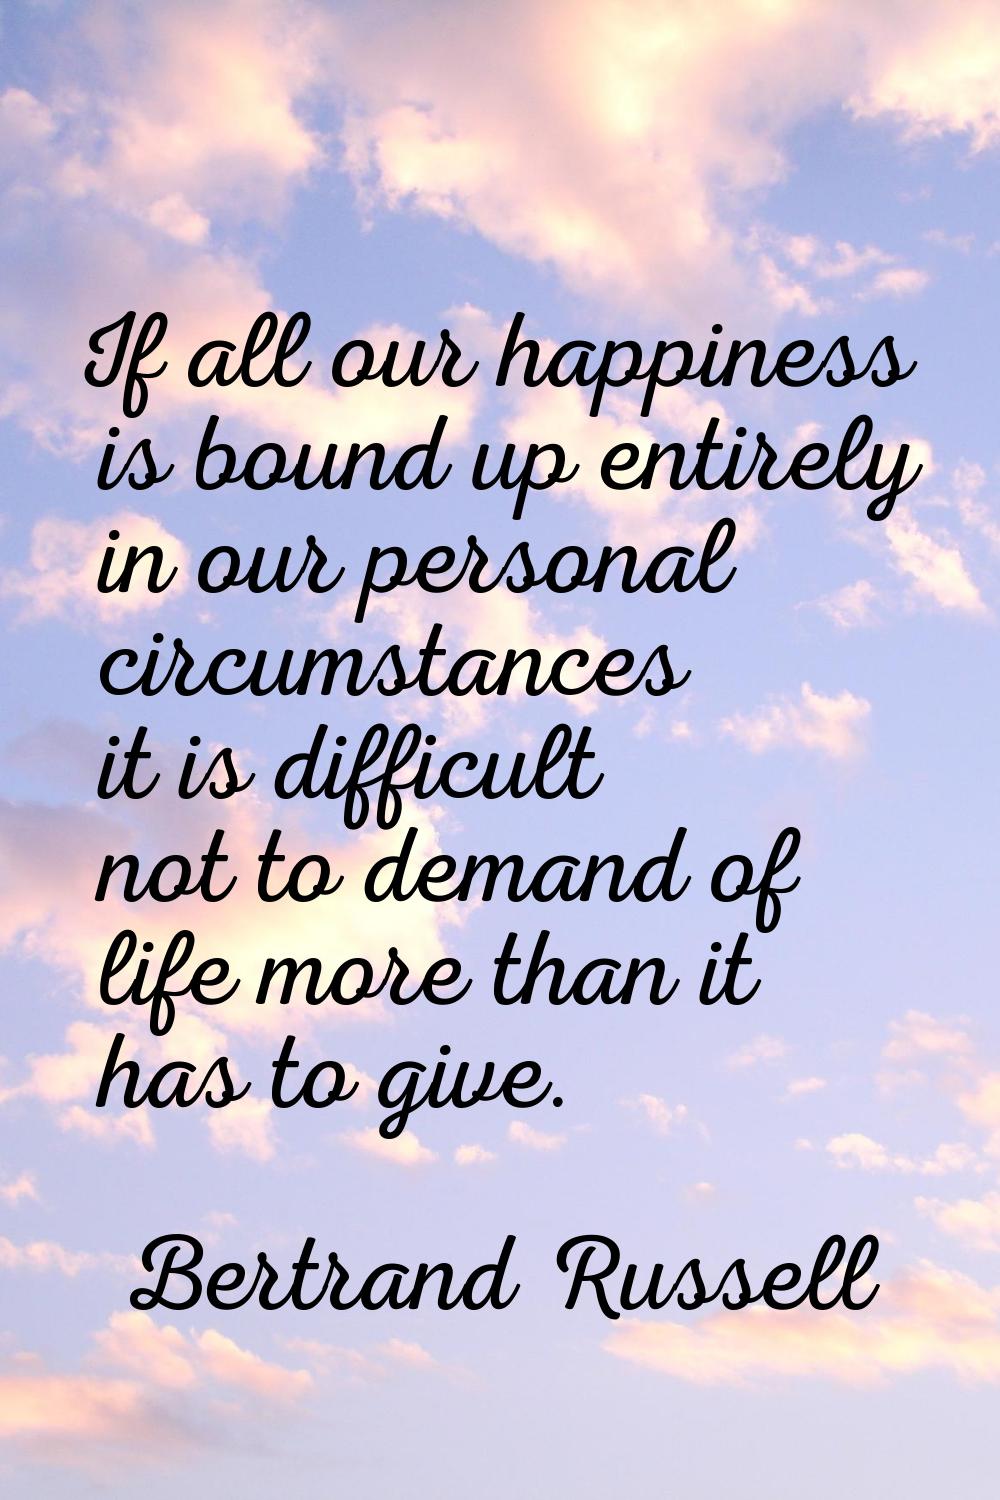 If all our happiness is bound up entirely in our personal circumstances it is difficult not to dema